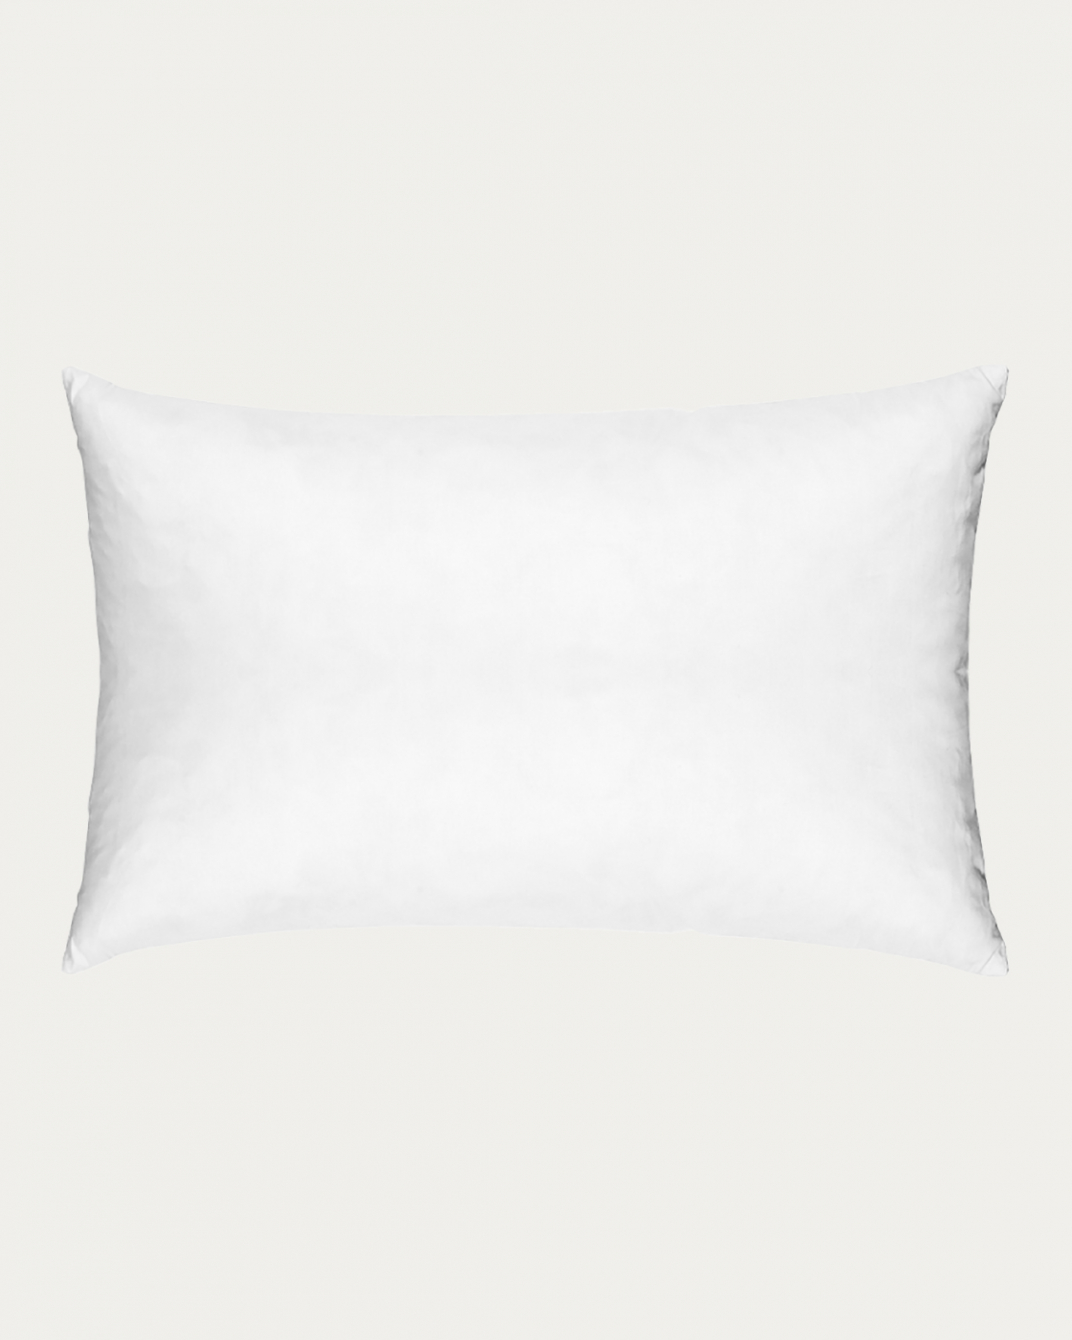 Product image white SYNTHETIC cushion insert made of cotton with polyester filling from LINUM DESIGN. Size 40x60 cm.